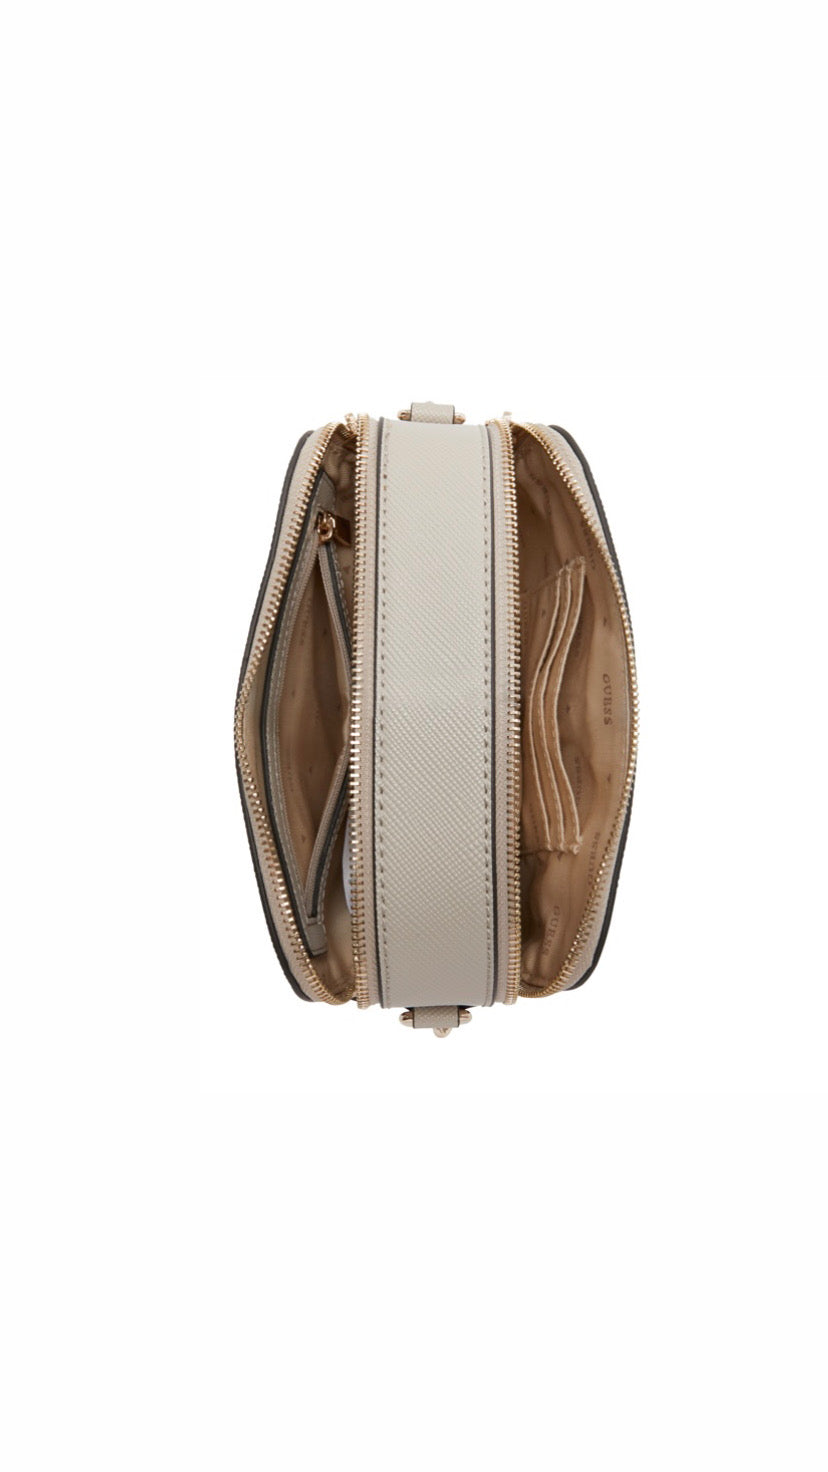 zg787914 Guess Noelle  taupe